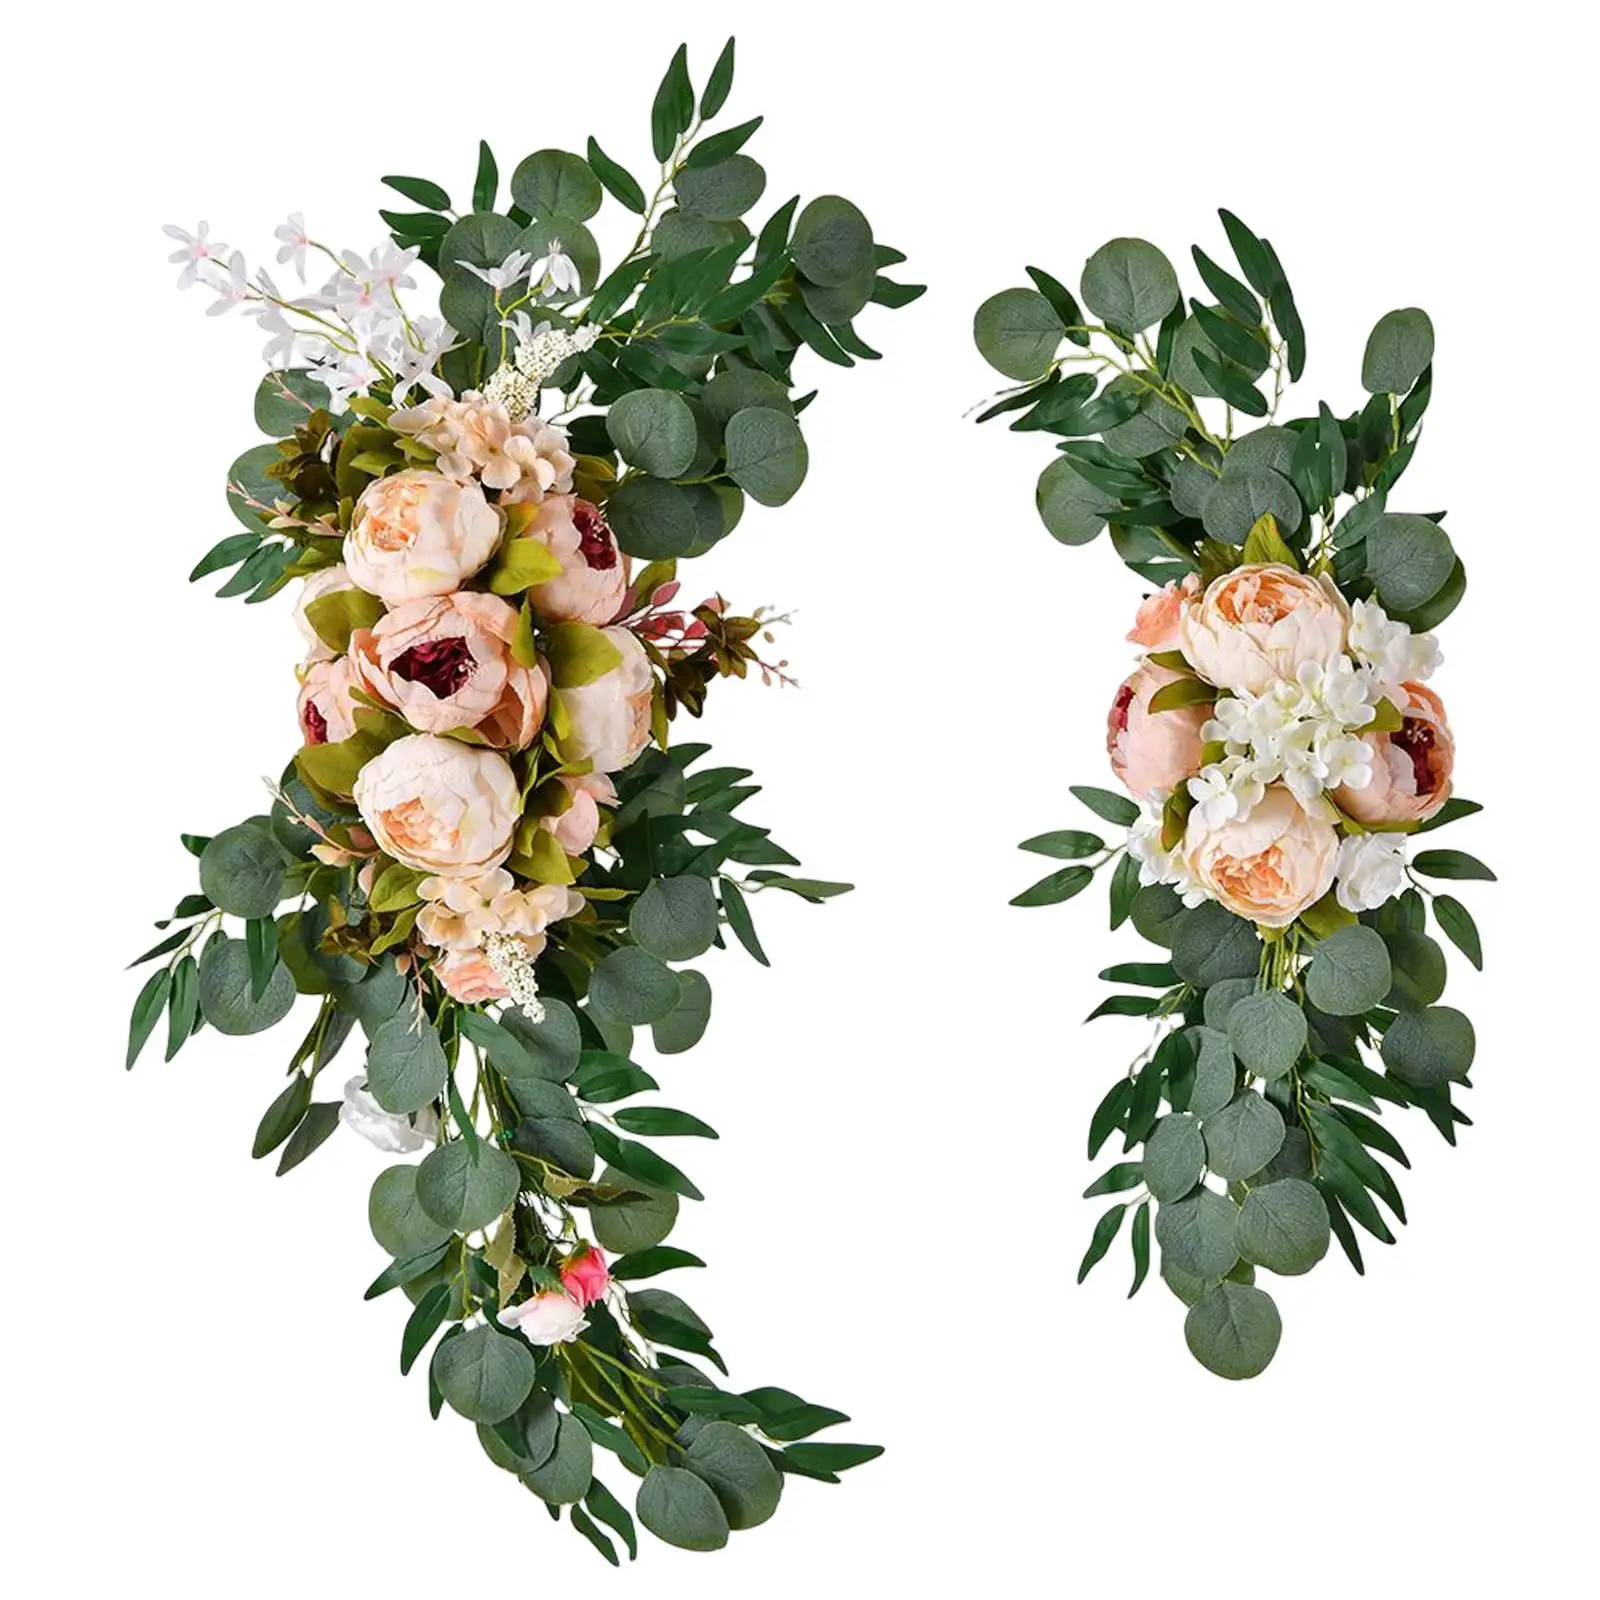 Artificial Flowers Arch Decor Centerpiece Garland Greenery Flower Arrangement Floral Swags for Wall Living Room Window Party